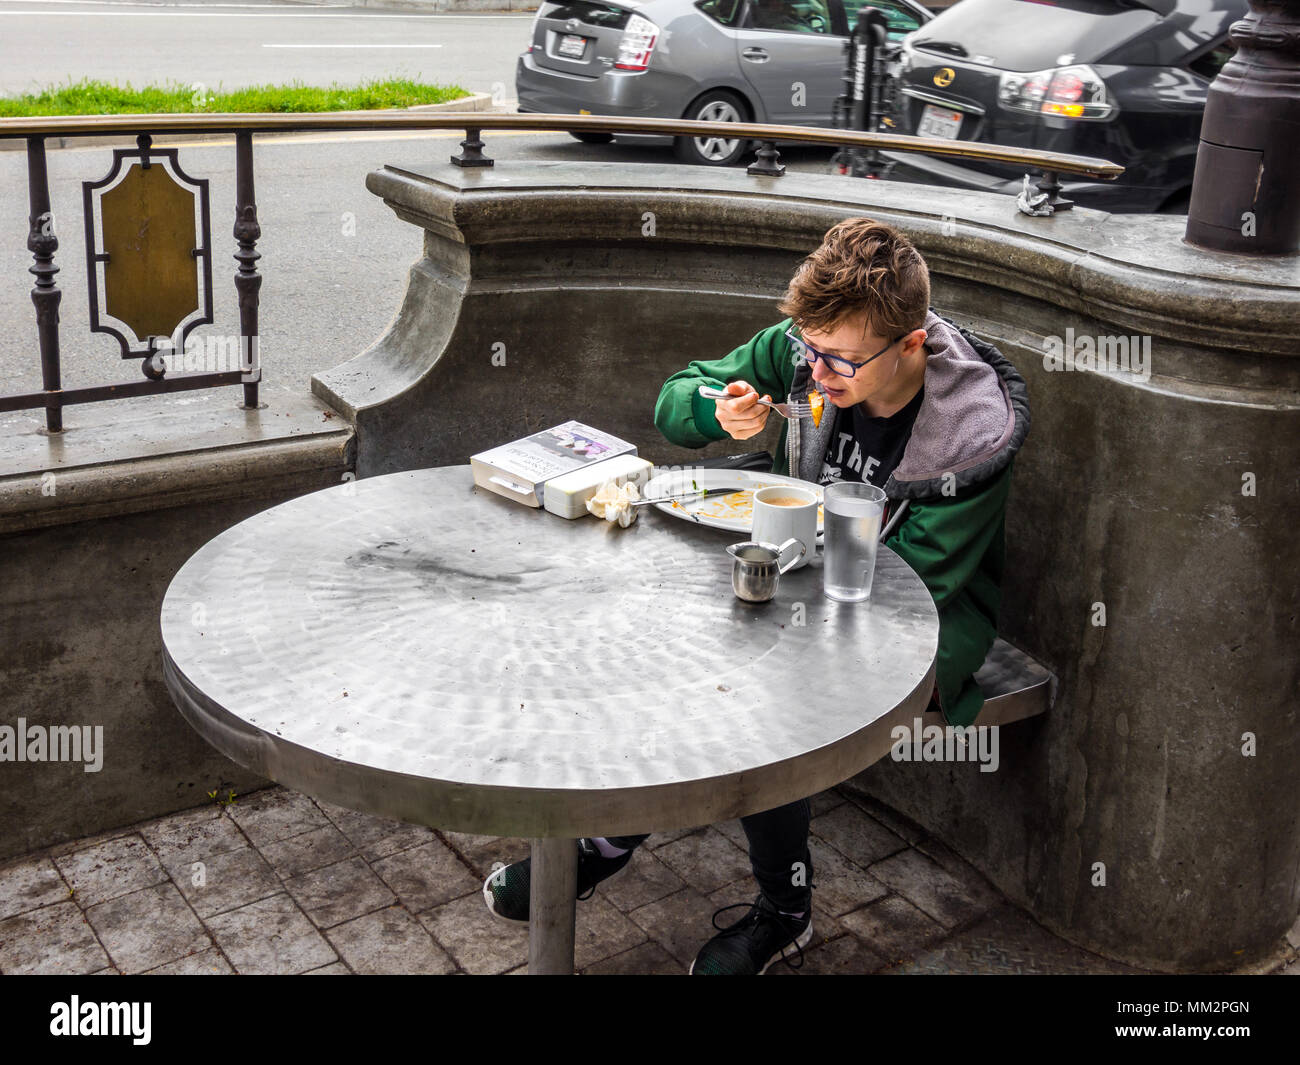 Youth eating alone at outside table, Berkeley, California, USA. Stock Photo